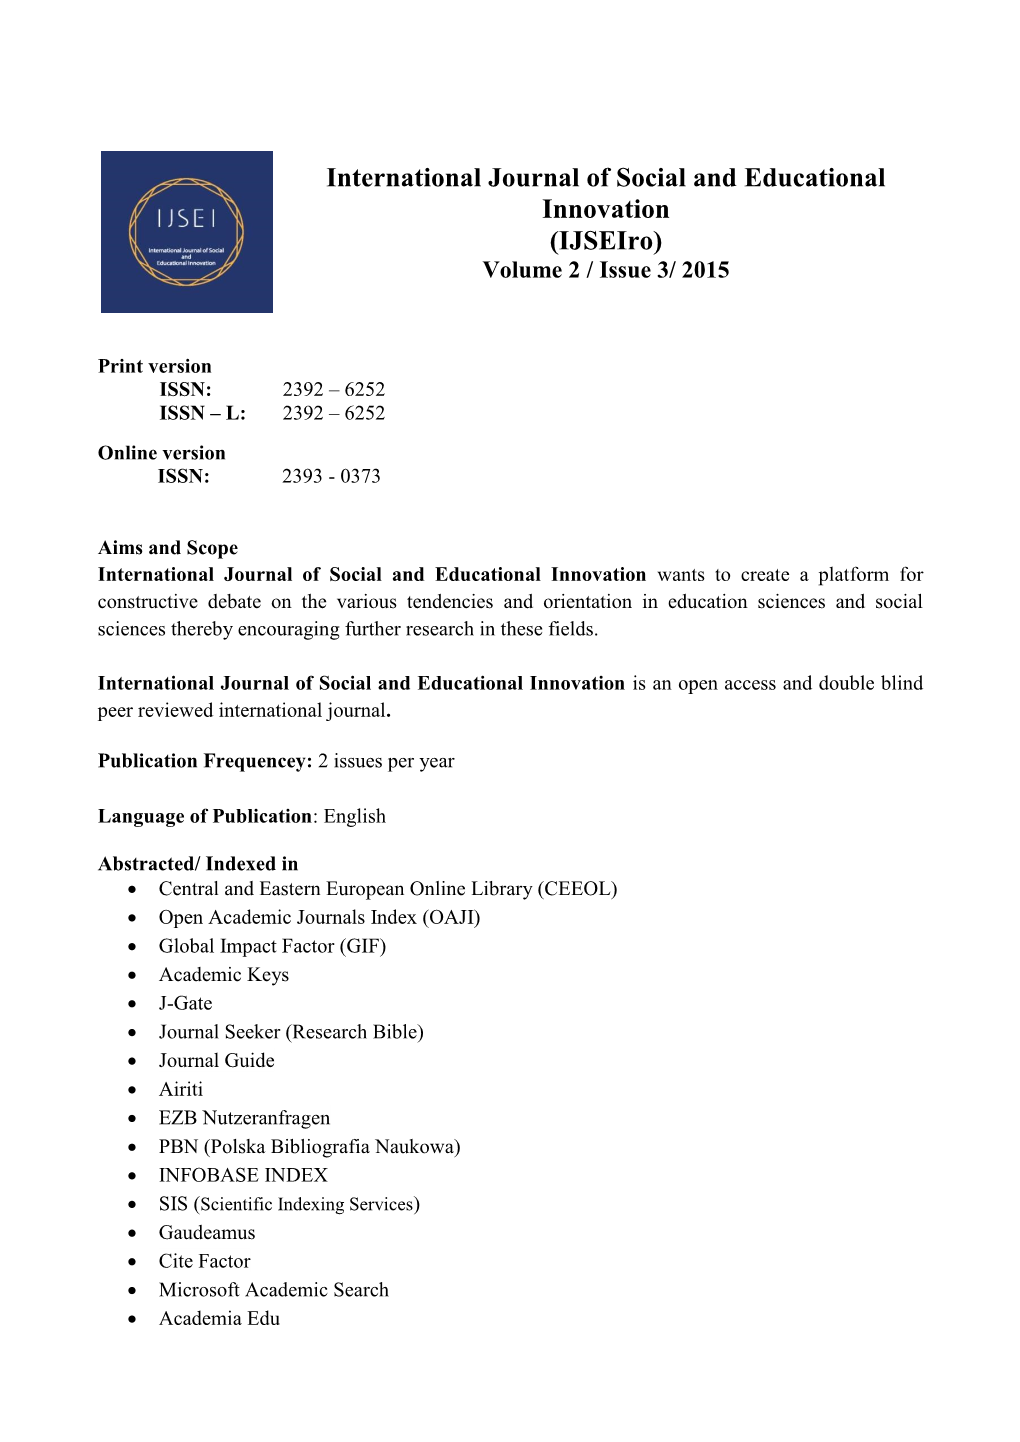 International Journal of Social and Educational Innovation (Ijseiro) Volume 2 / Issue 3/ 2015